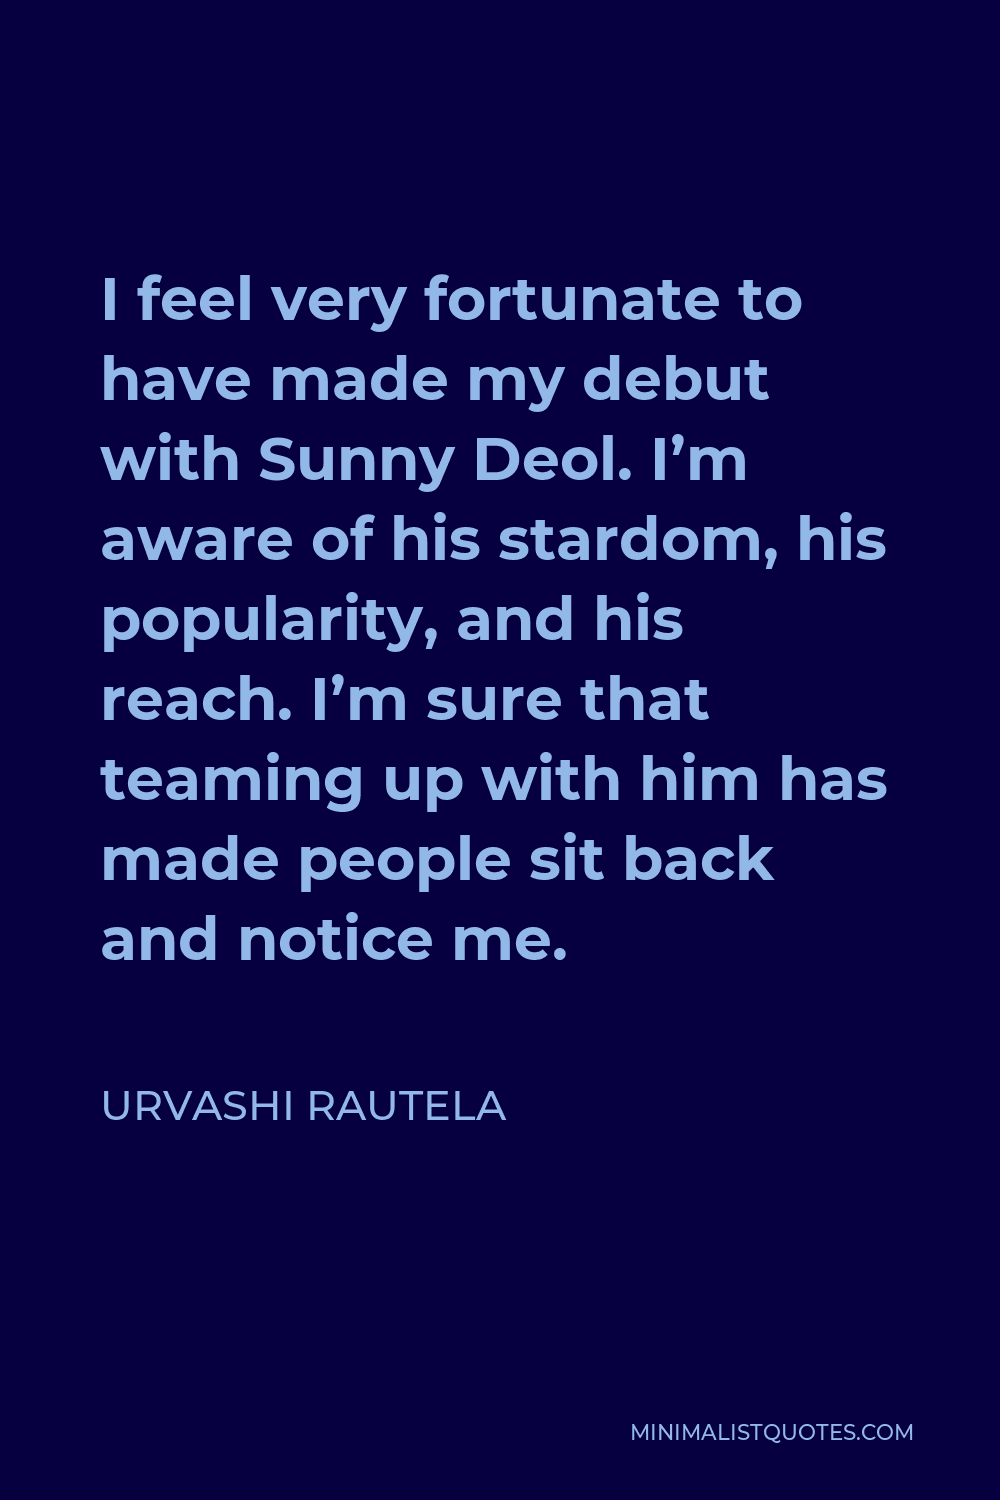 Urvashi Rautela Quote - I feel very fortunate to have made my debut with Sunny Deol. I’m aware of his stardom, his popularity, and his reach. I’m sure that teaming up with him has made people sit back and notice me.